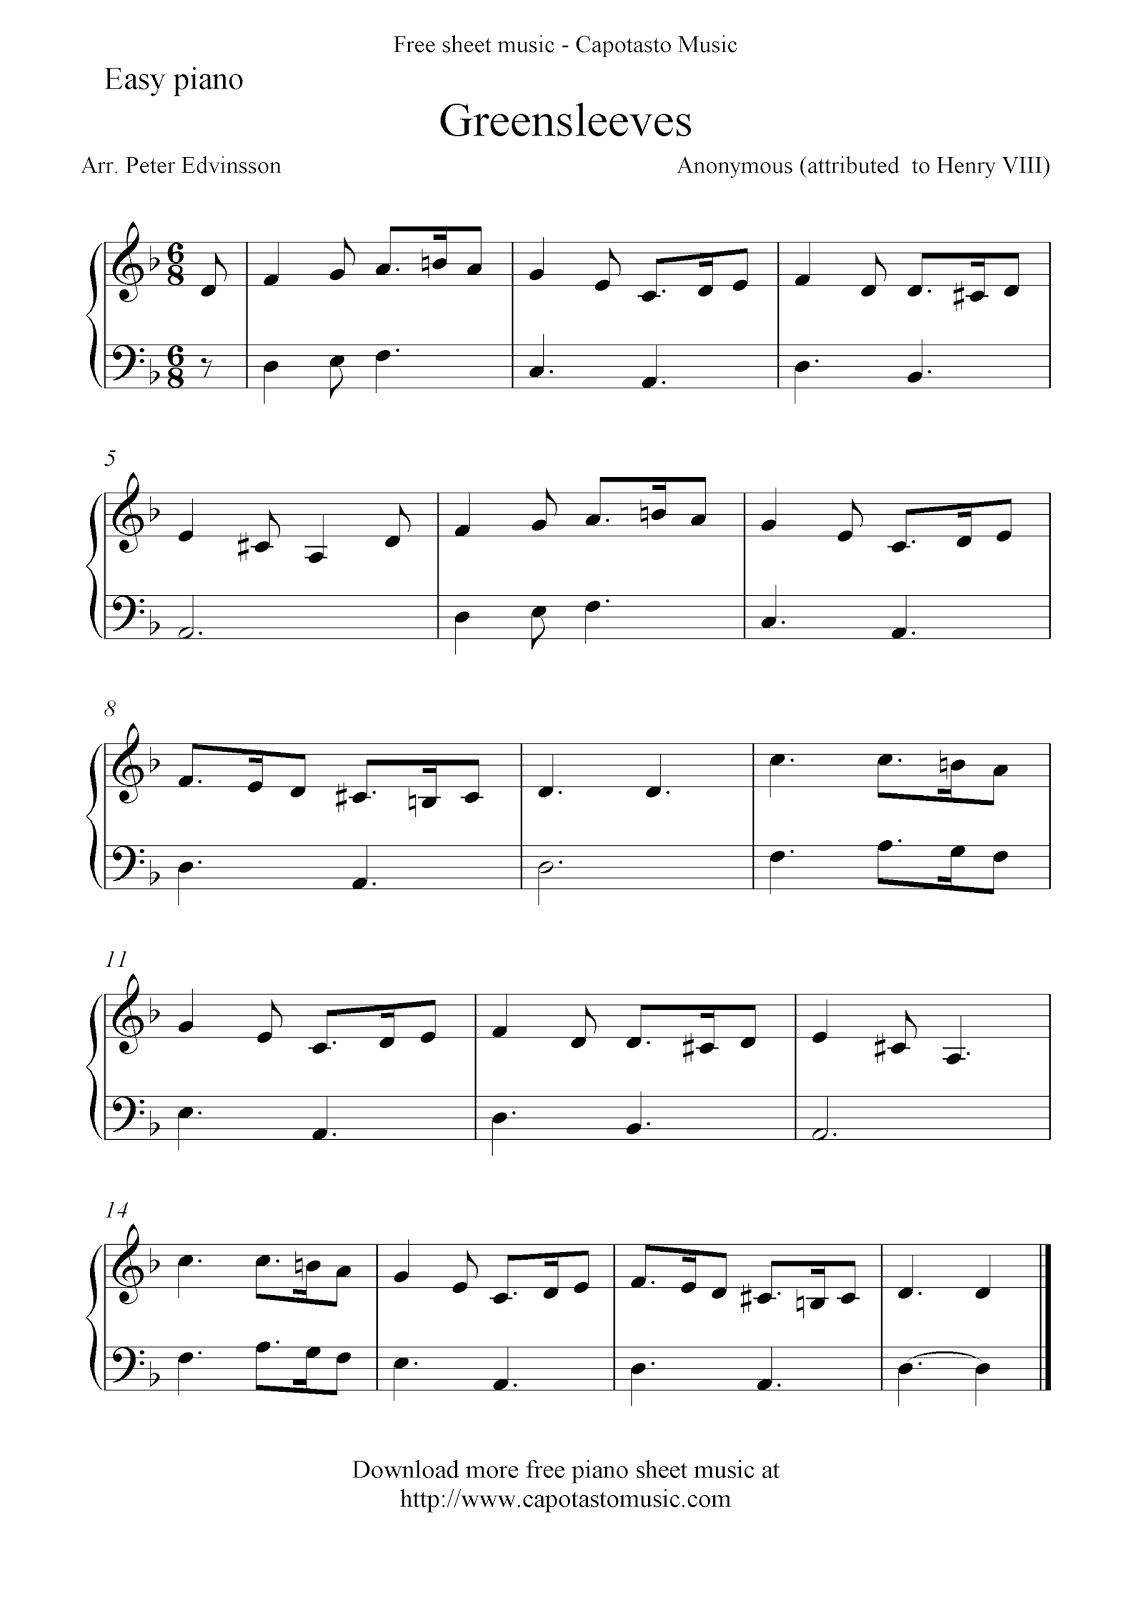 Free Sheet Music Scores: Free #piano Sheet Music Notes, Greensleeves - Free Printable Pictures Of Music Notes